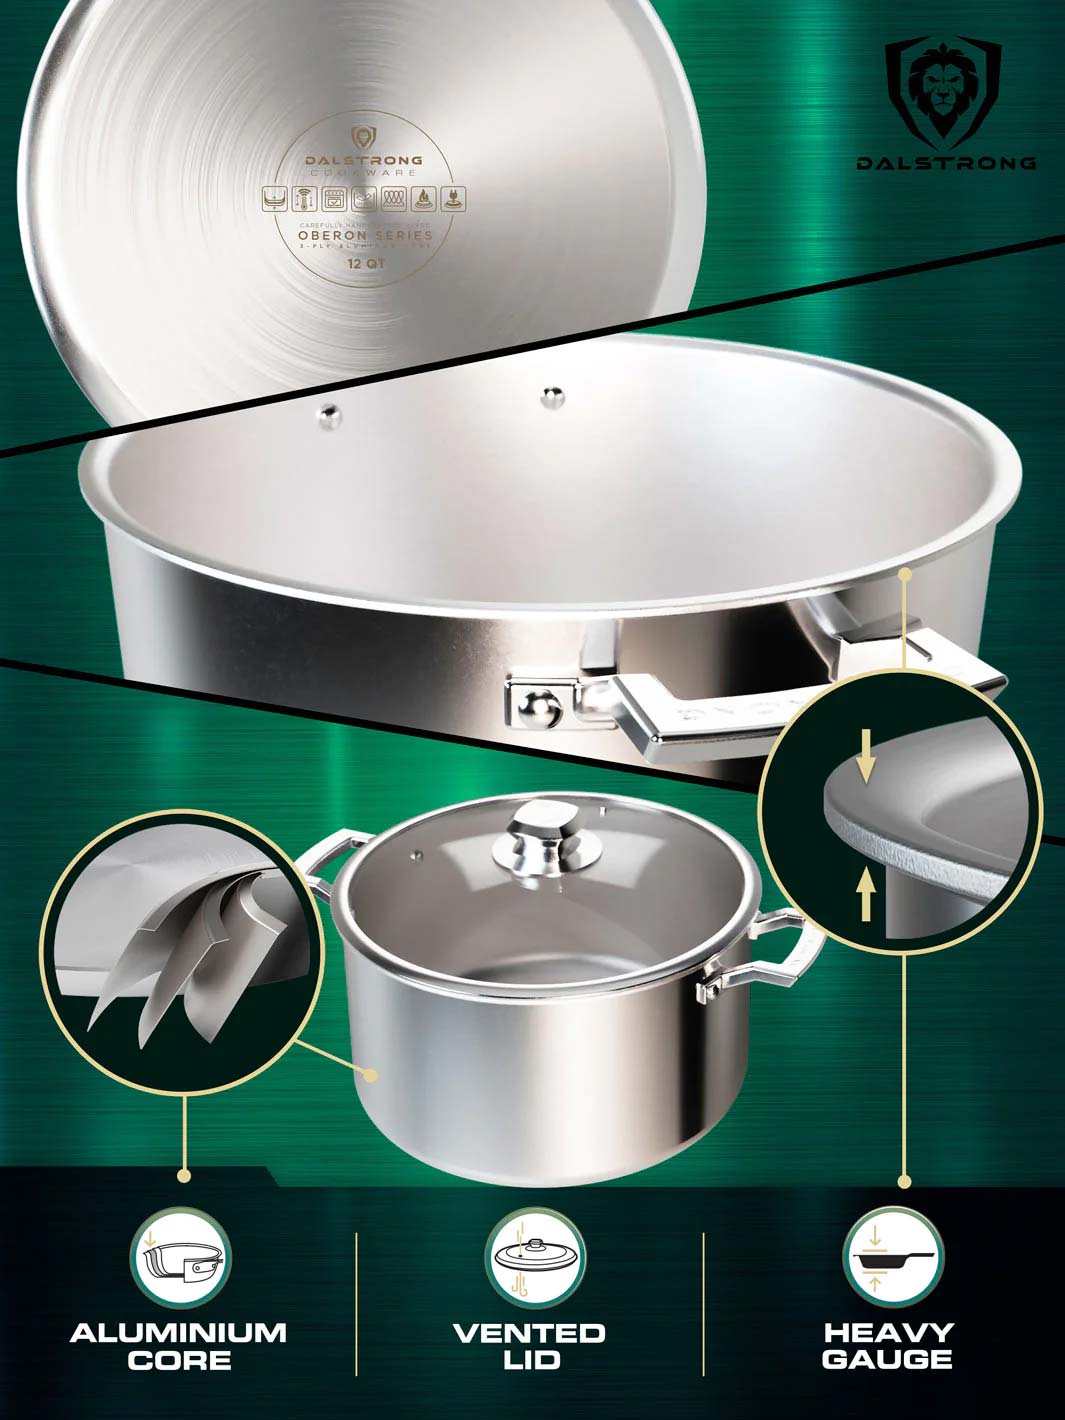 Dalstrong oberon series 12 quart stock pot silver showcasing it's aluminum core and vented lid.